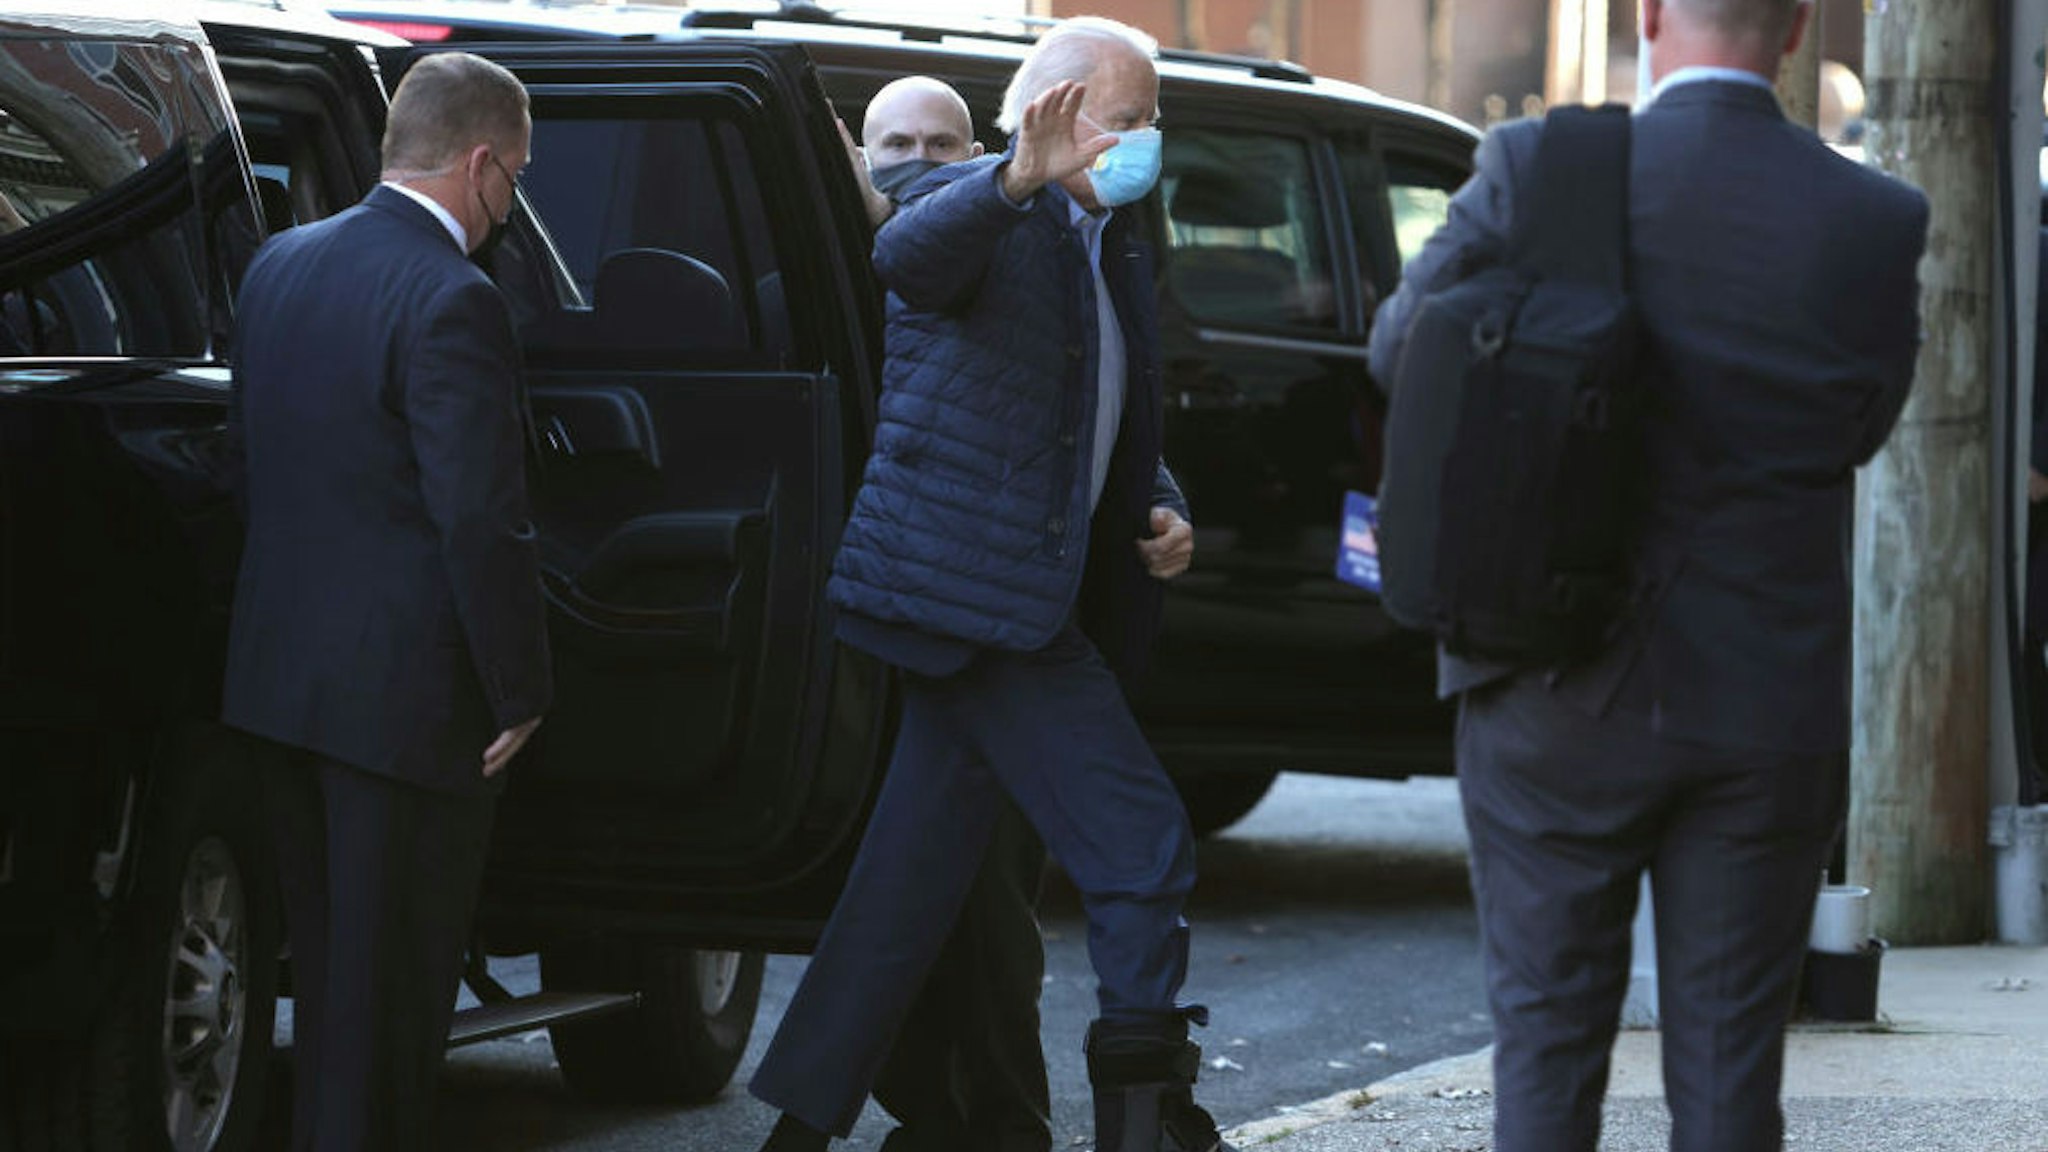 WILMINGTON, DELAWARE - DECEMBER 02: U.S. President-elect Joe Biden waves as he arrives for a virtual roundtable with workers and small business owners at The Queen Theatre on December 2, 2020 in Wilmington, Delaware. President-elect Biden held the meeting to discuss with workers and small business owners impacted by the economic crisis.